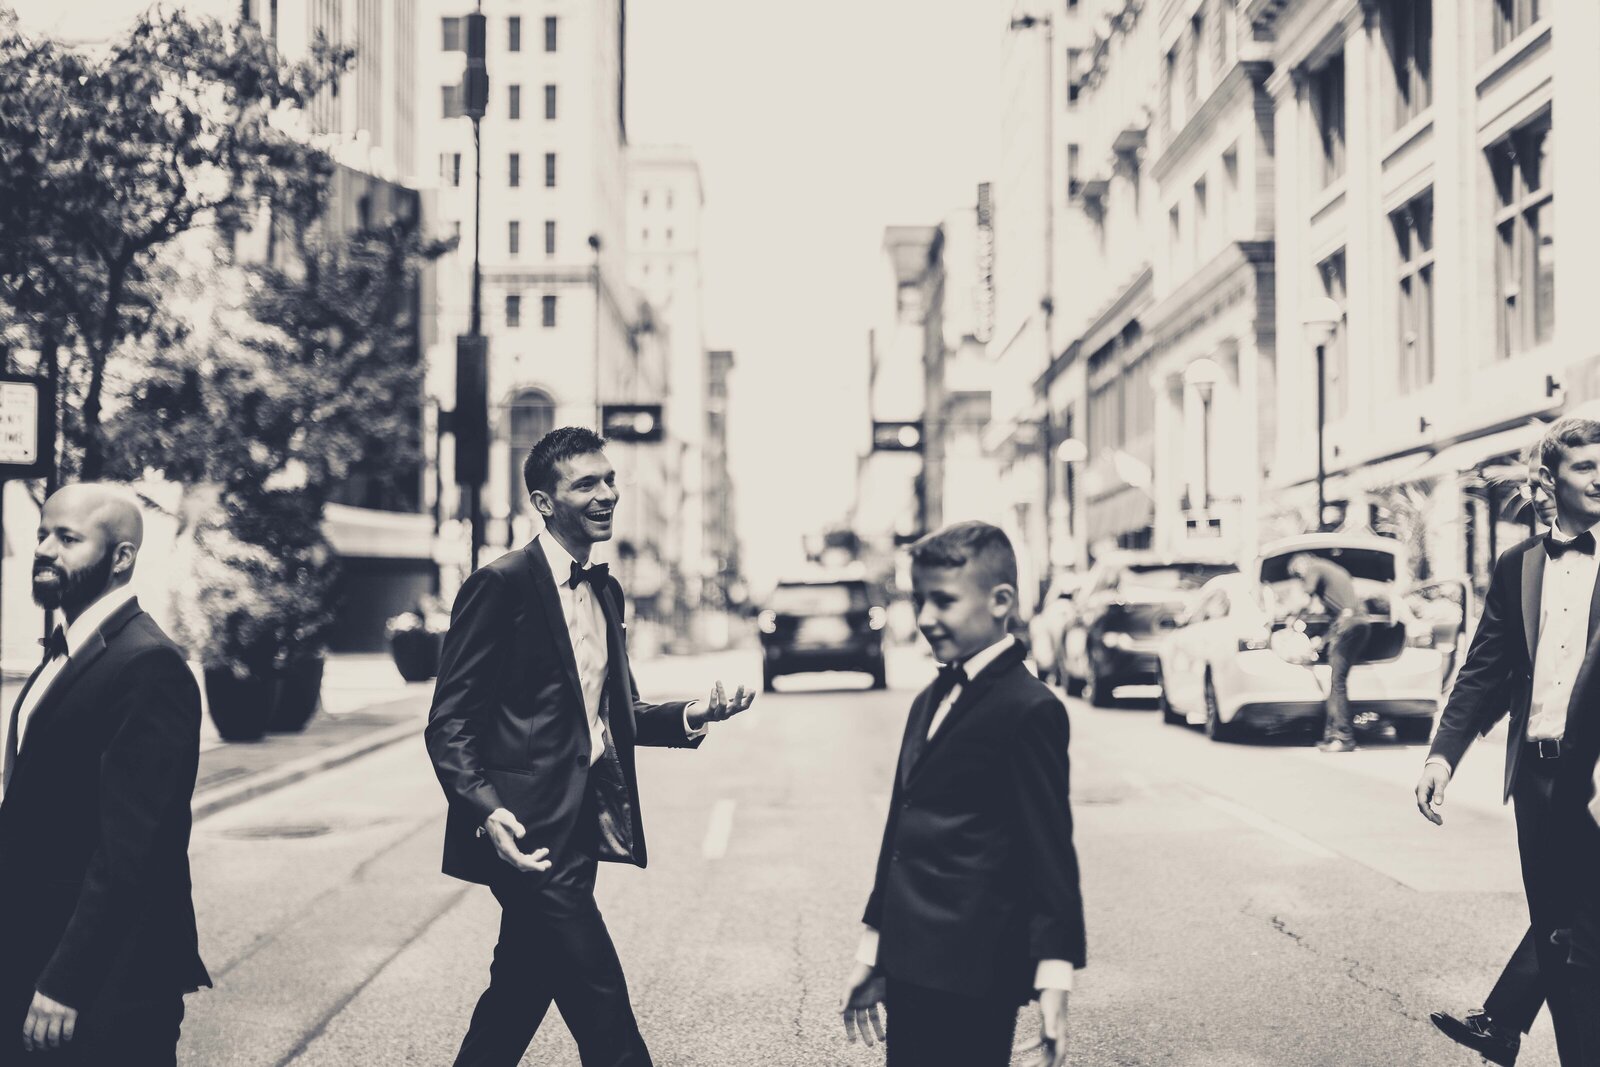 Capture the cool and confident swagger of the groomsmen as they stride through the bustling streets of downtown Cincinnati. This dynamic photograph showcases the group's sharp attire and the vibrant urban backdrop, reflecting a modern take on traditional wedding portraits. Perfect for couples looking for unique and spirited wedding party photos, this image combines the excitement of the city with the celebratory spirit of the wedding day.